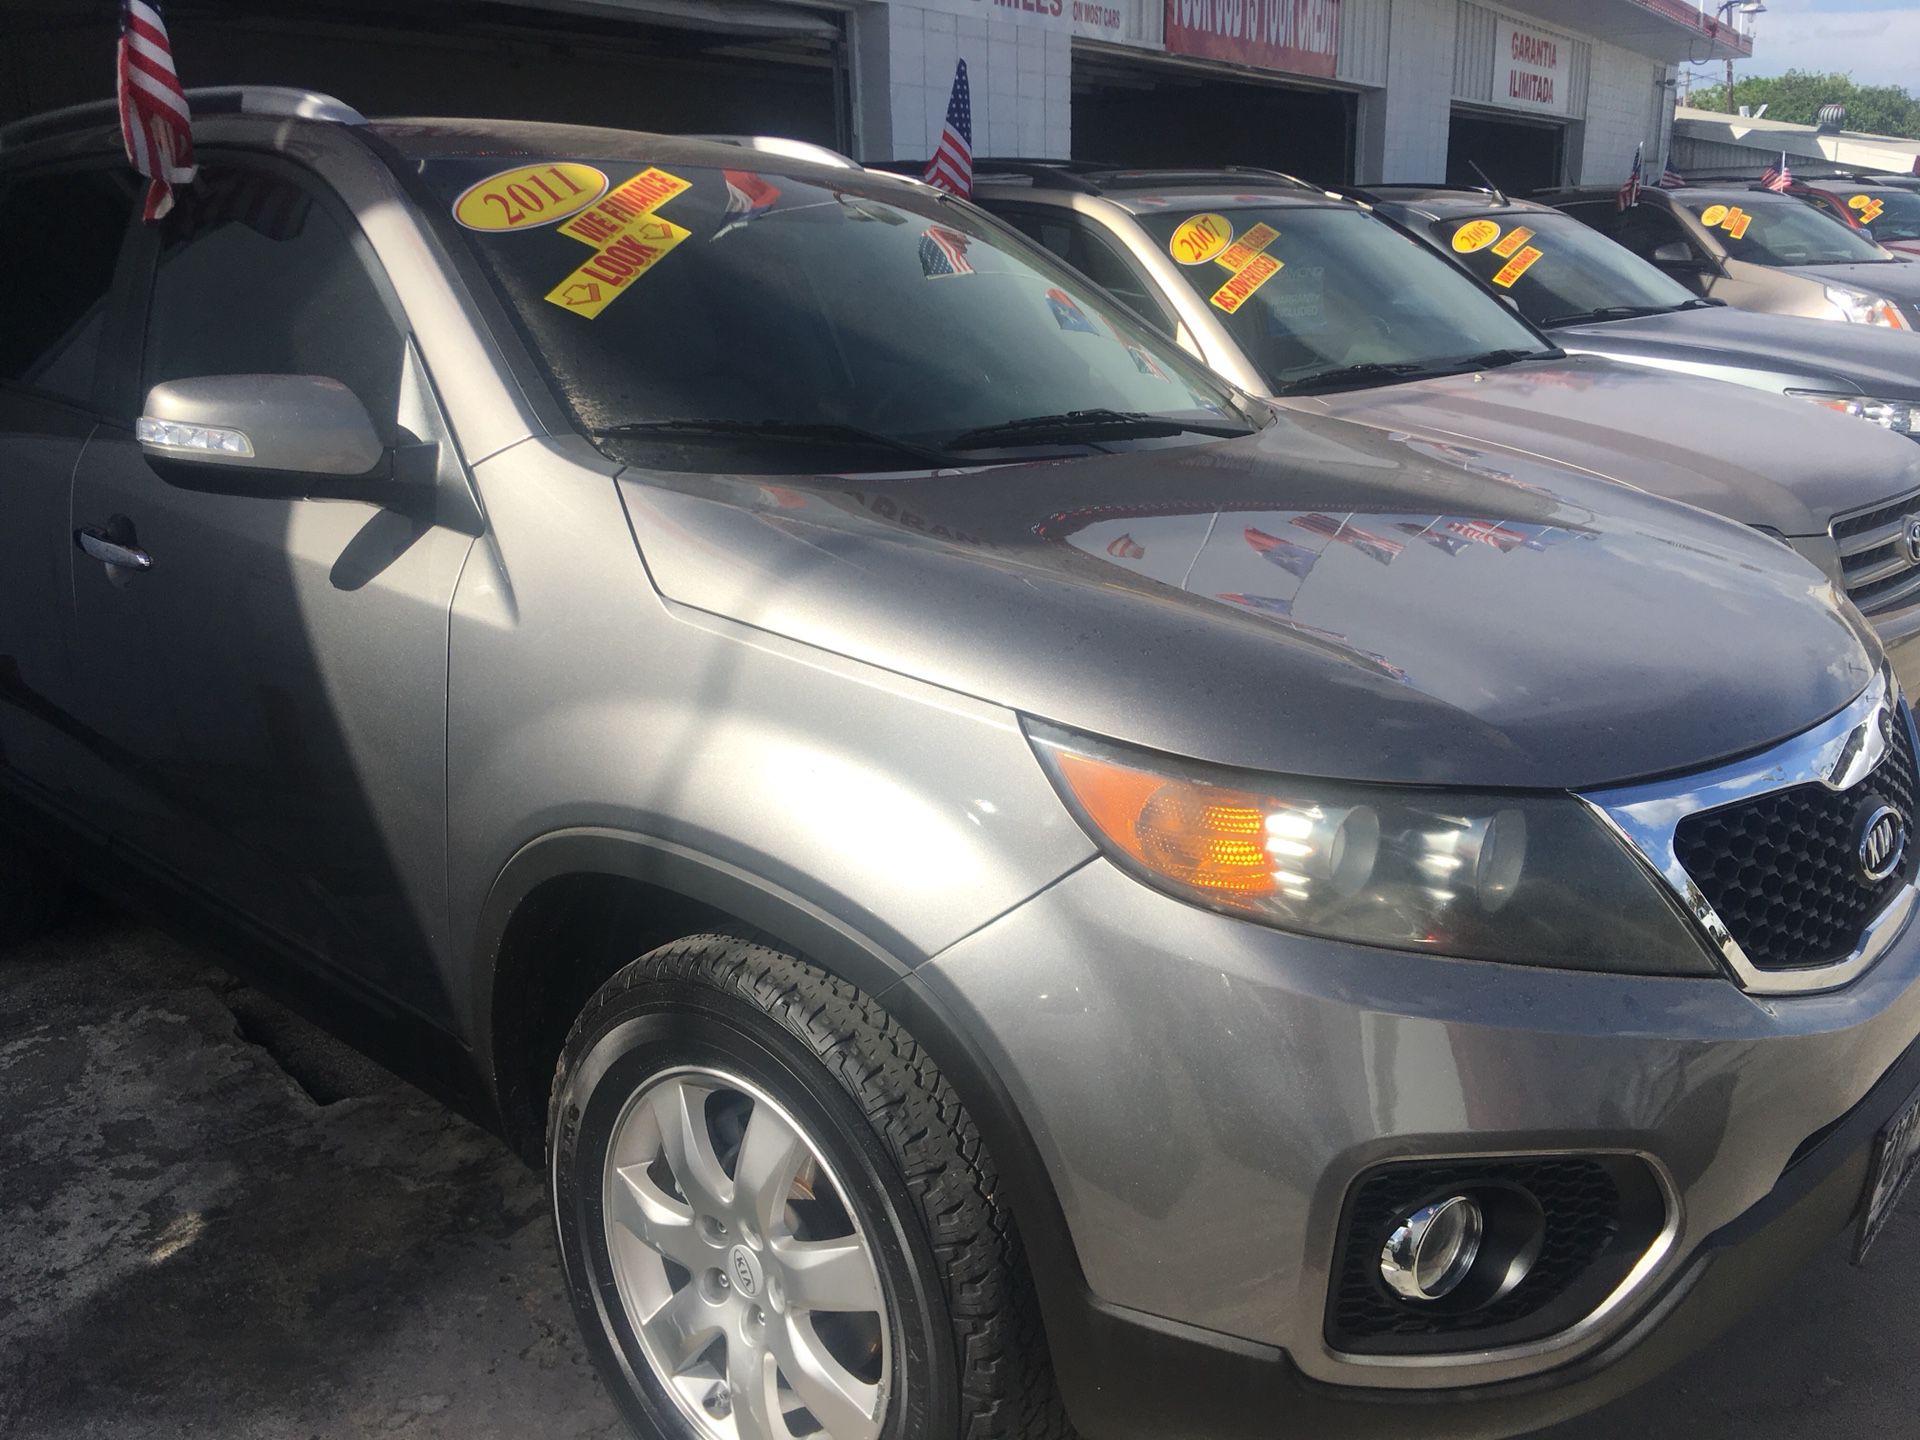 2011 Kia Sorrento 3rd row 2.5L gas saver-In House 🏠 Financing Today-$1995 Down&Drive